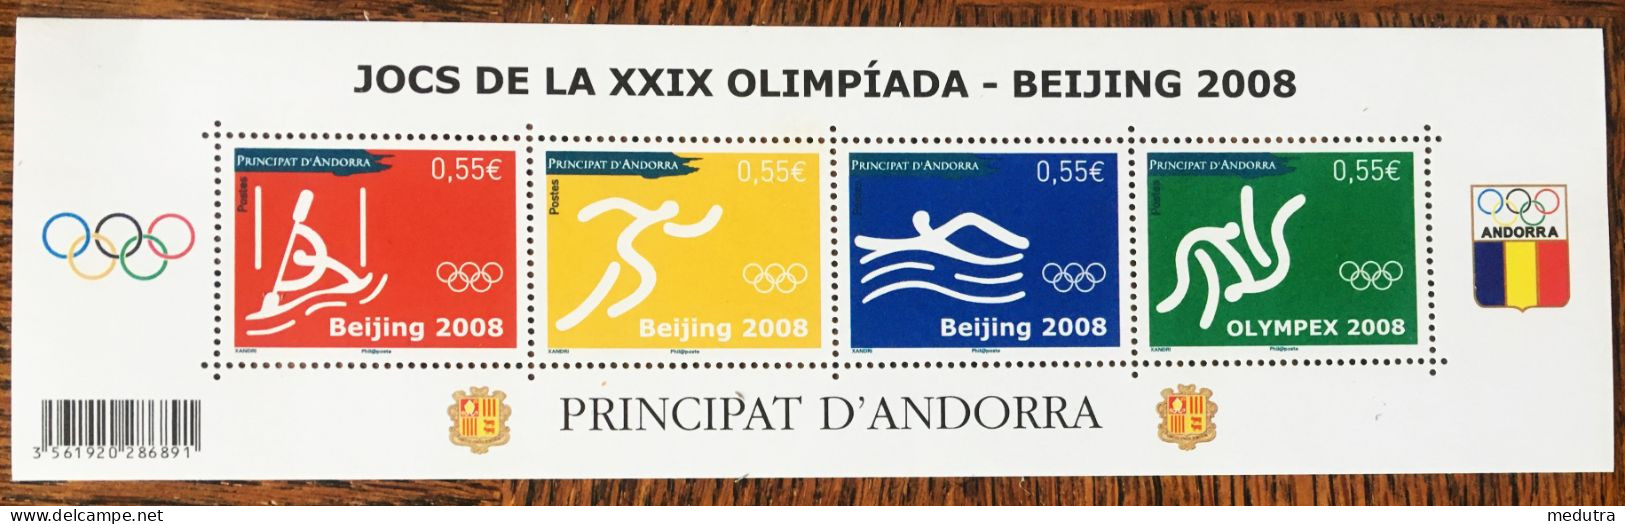 Andorre Bloc 661A  Neuf** (année 2008 : 658 659 660 661) - Unused Stamps